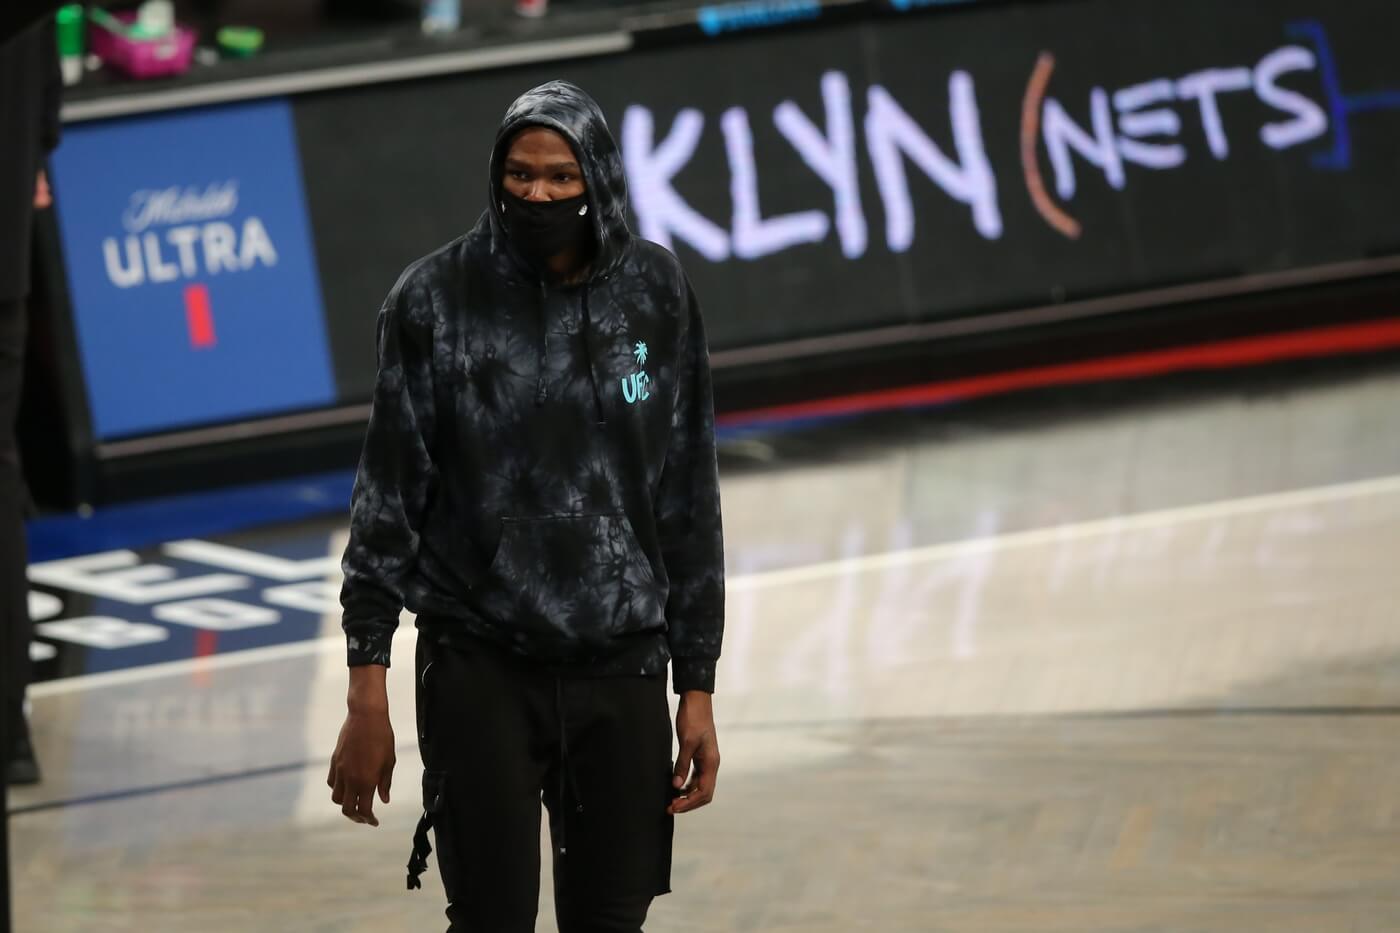 Mar 21, 2021; Brooklyn, New York, USA; Brooklyn Nets power forward Kevin Durant (7) walks onto the court during a time out during the fourth quarter against the Washington Wizards at Barclays Center. Mandatory Credit: Brad Penner-USA TODAY Sports